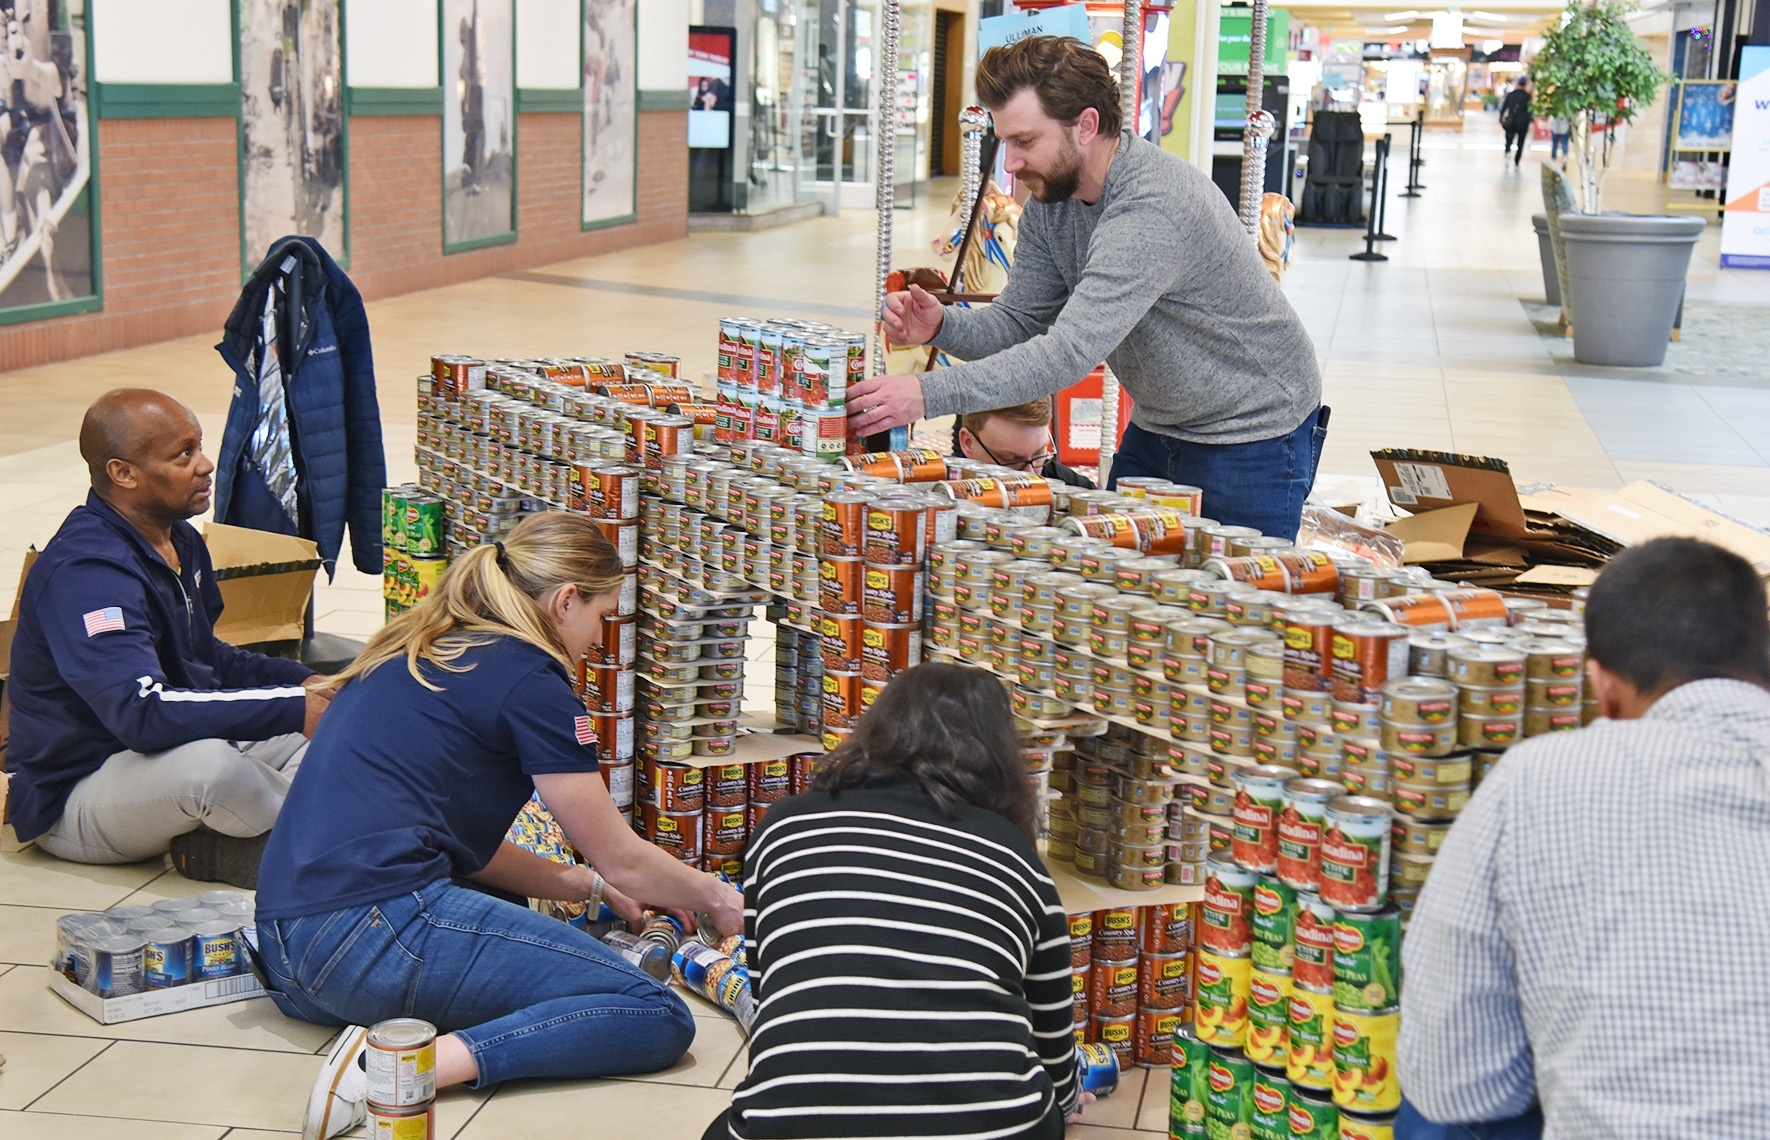 A Canstruction event in Fredericksburg, VA, where our team a built canned good "sculpture" of a familiar local landmark